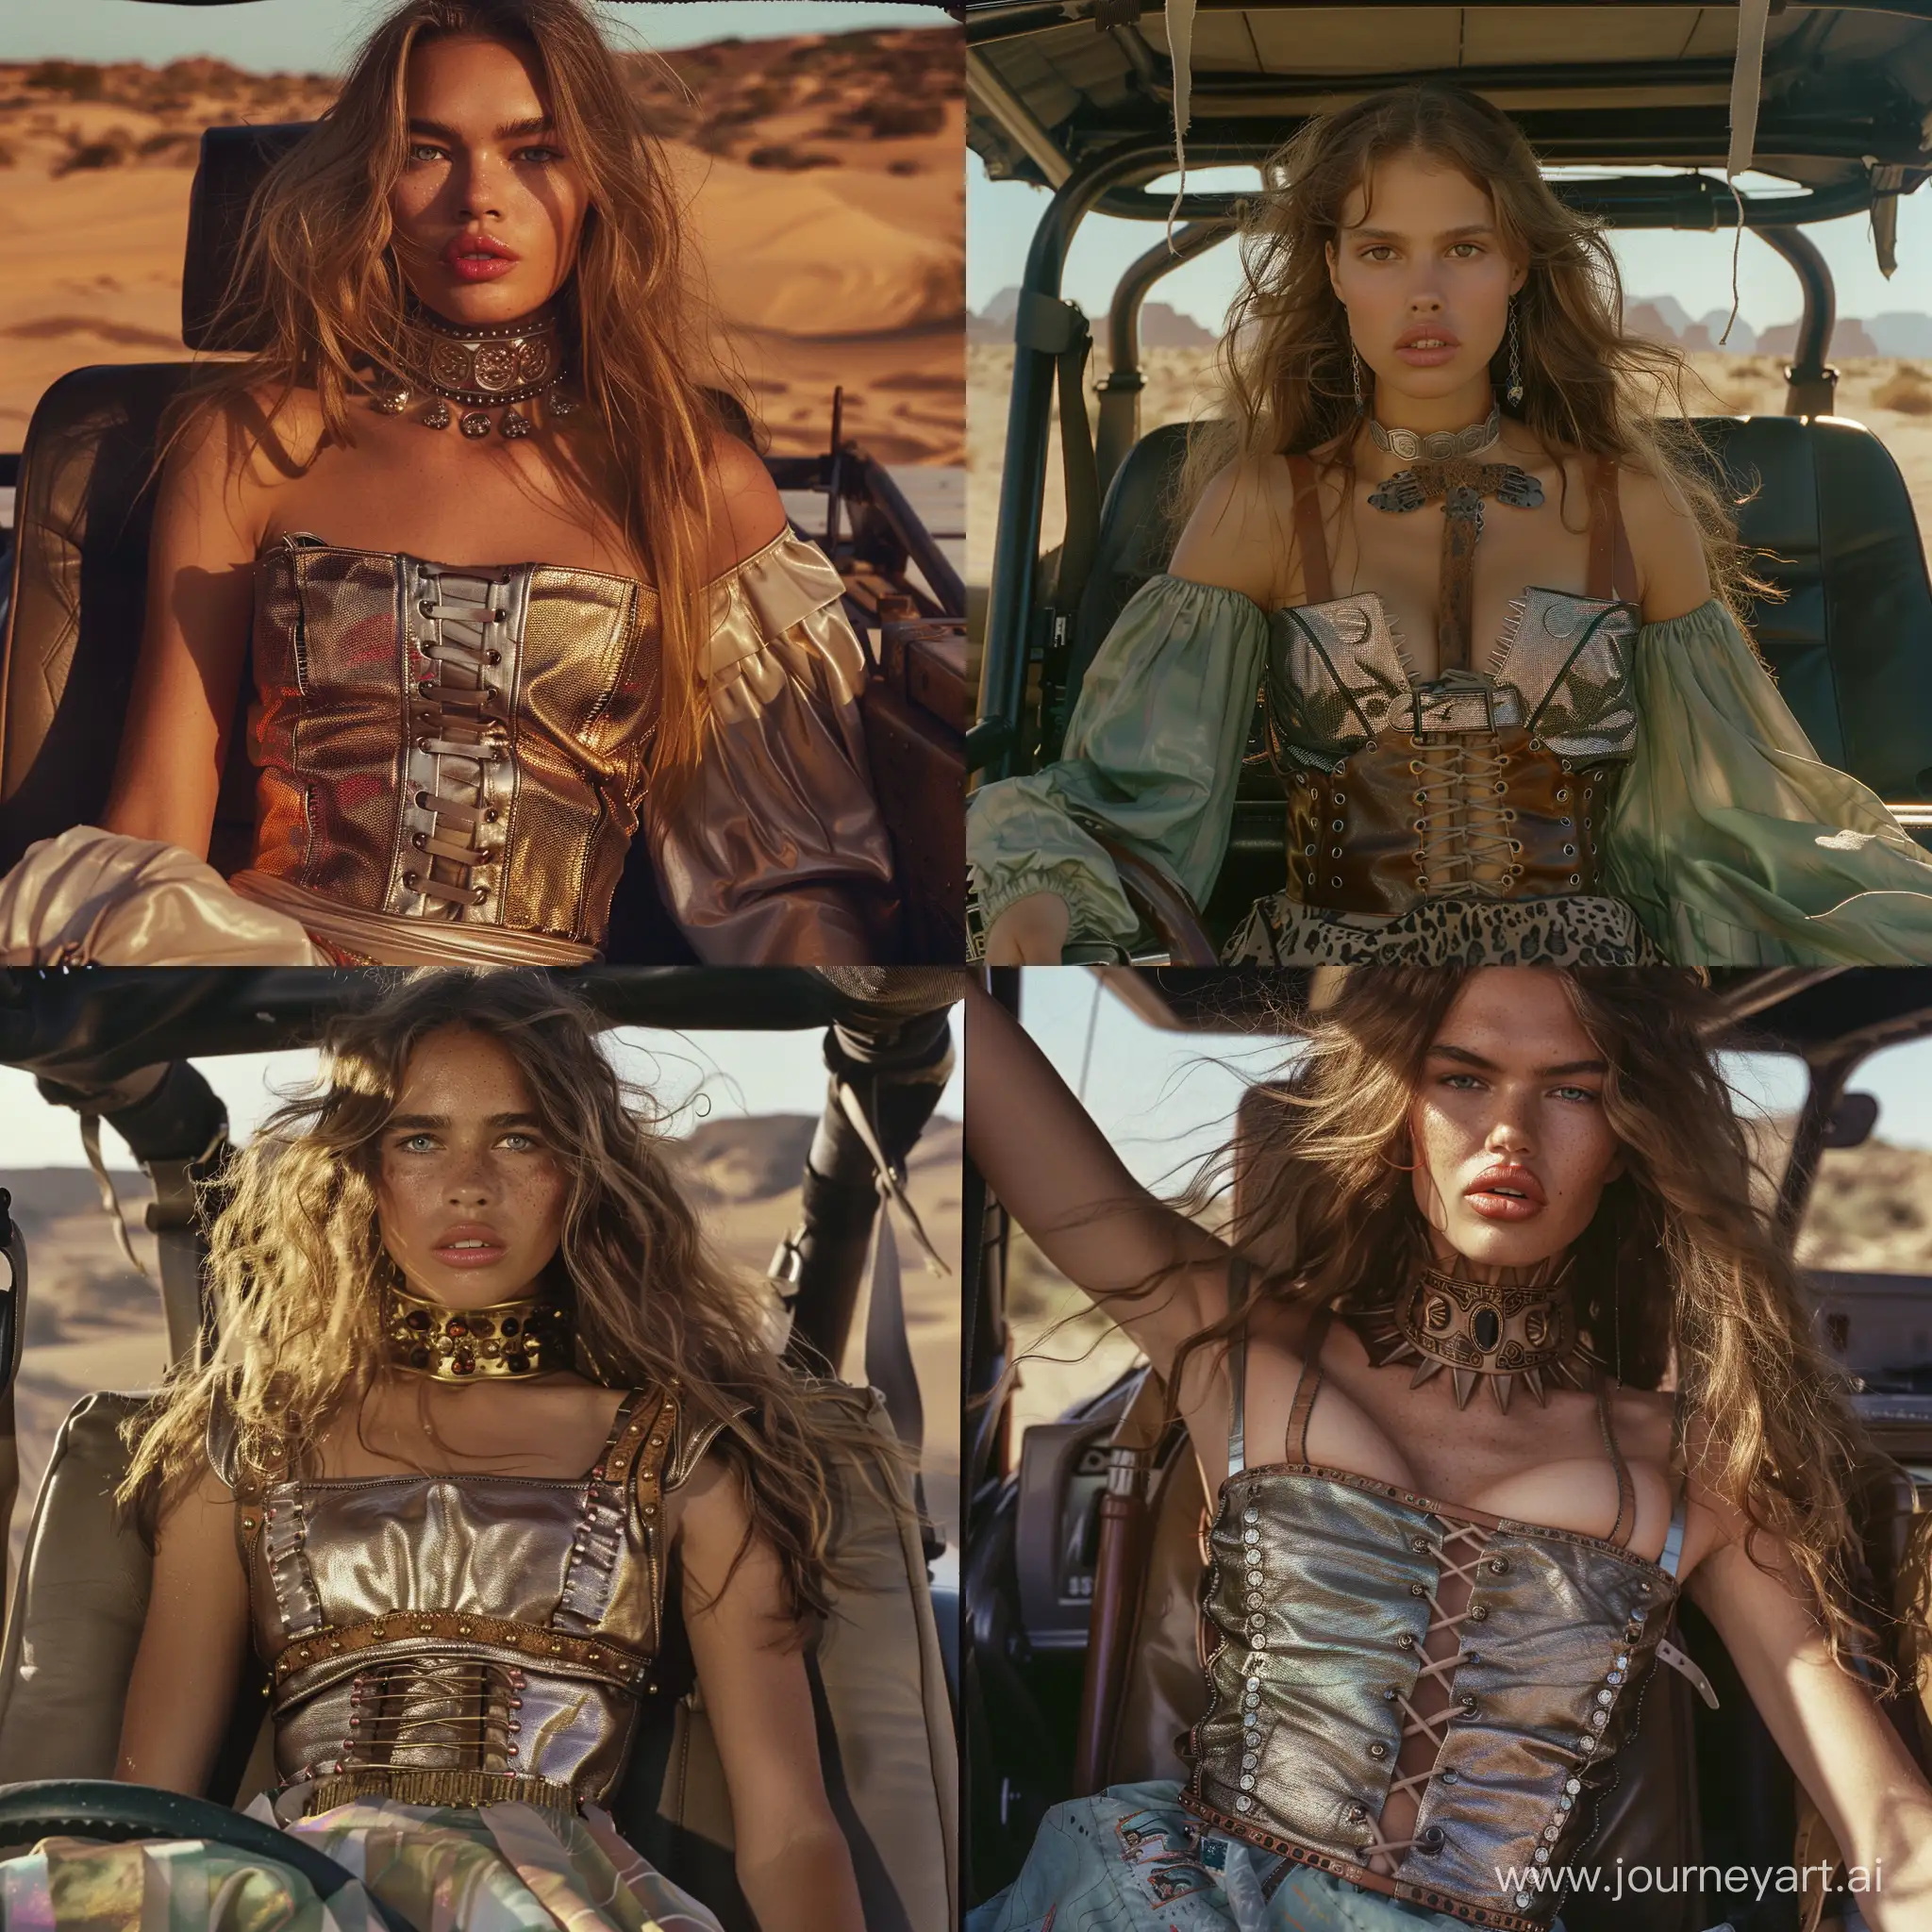 Modern-Bedouin-in-Mad-Max-Style-Jeep-Portrait-with-Metallic-Corset-and-Face-Ornaments